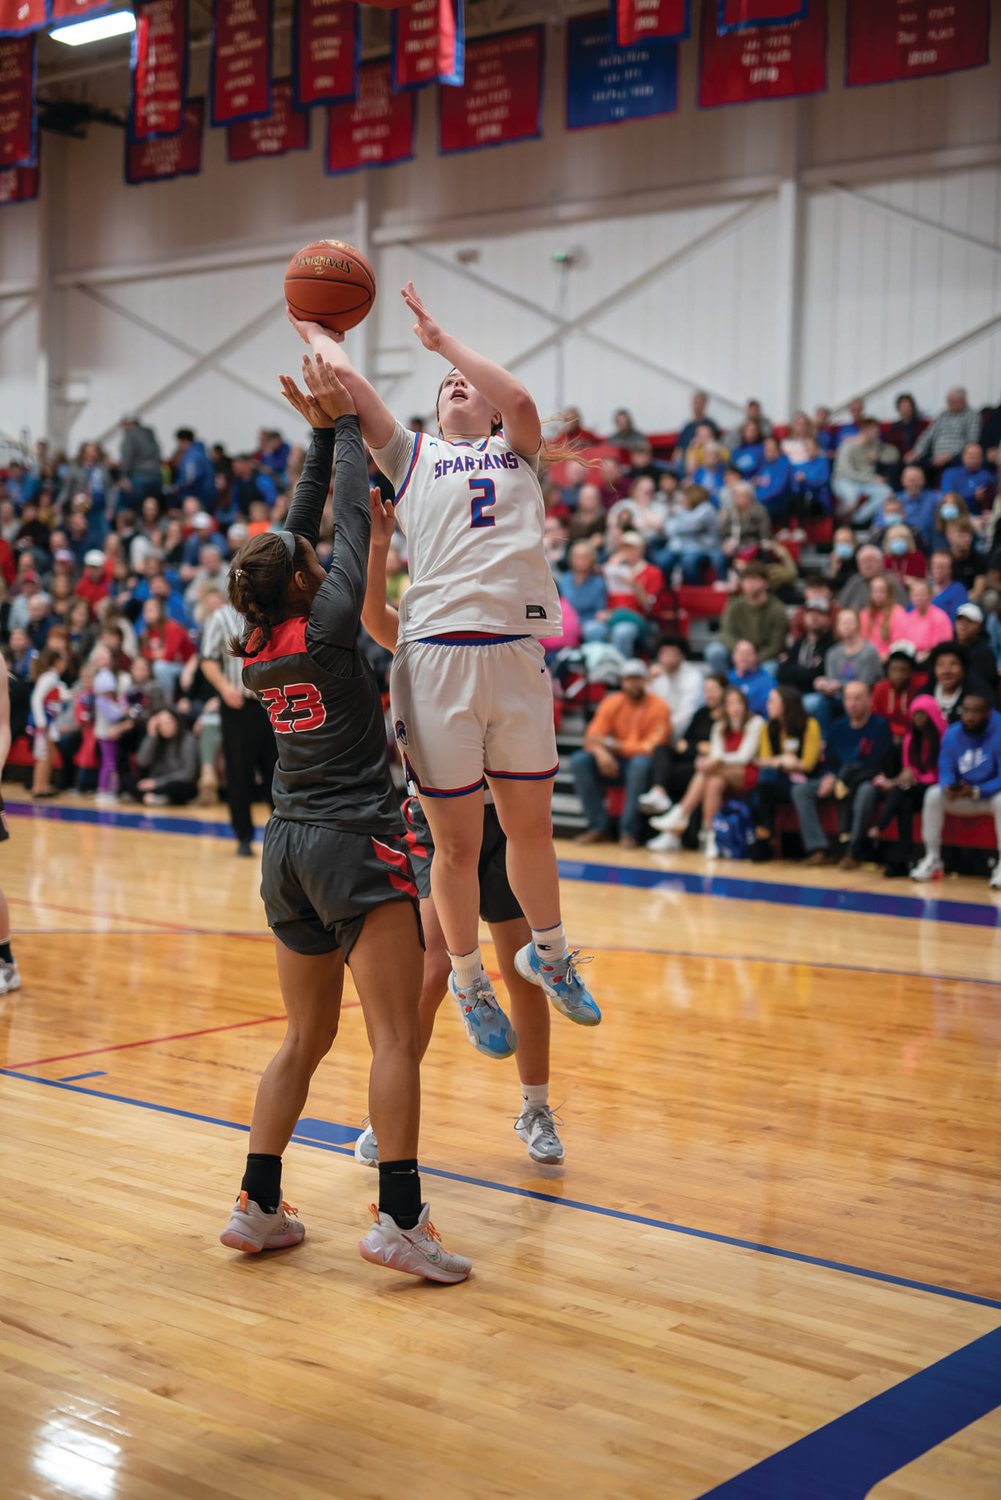 Grace Billington, shown scoring in a game earlier this season, helped lead Moberly to an 18-9 season. The Lady Spartans’ season ended in a 42-39 loss to Kirksville on Tuesday night. (John Wright Photography)